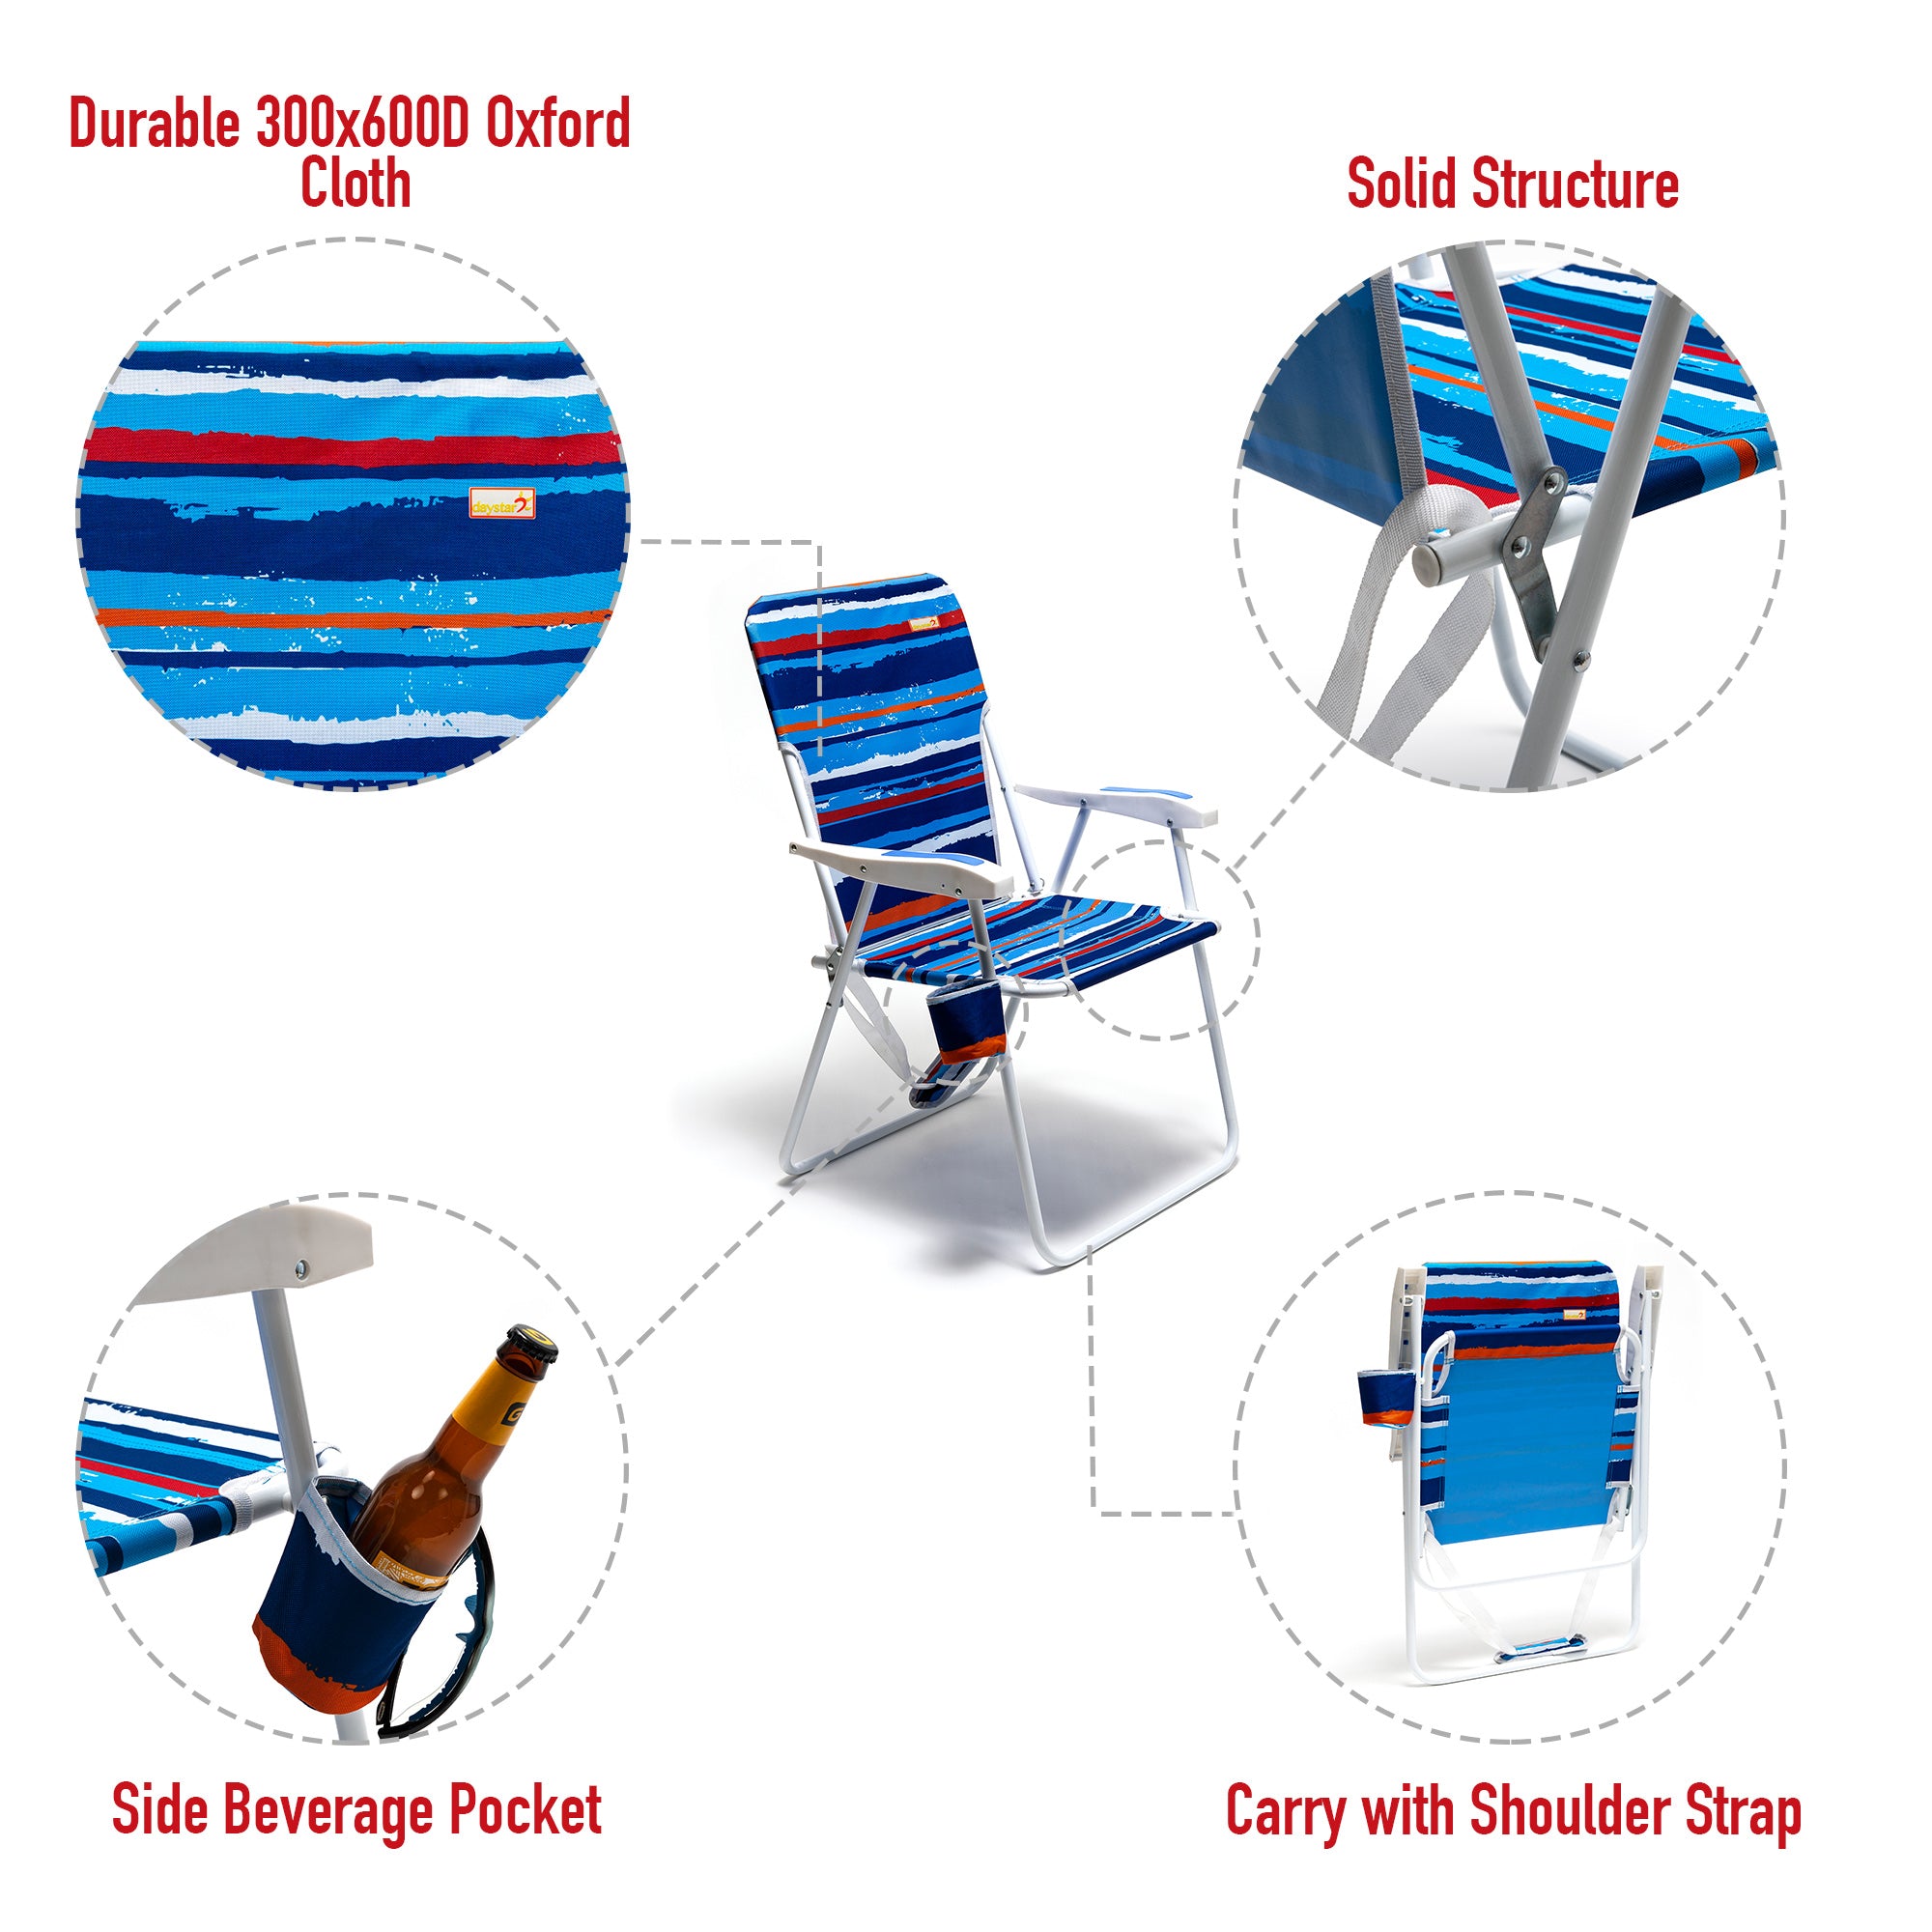 Tall Folding Beach Chair Lightweight, Portable High Sand Chair For Adults Heavy Duty 300 LBS With Cup Holders, Foldable Camping Lawn Chairs For Camping, Outdooring, Traveling, Picnic Concert,Sports